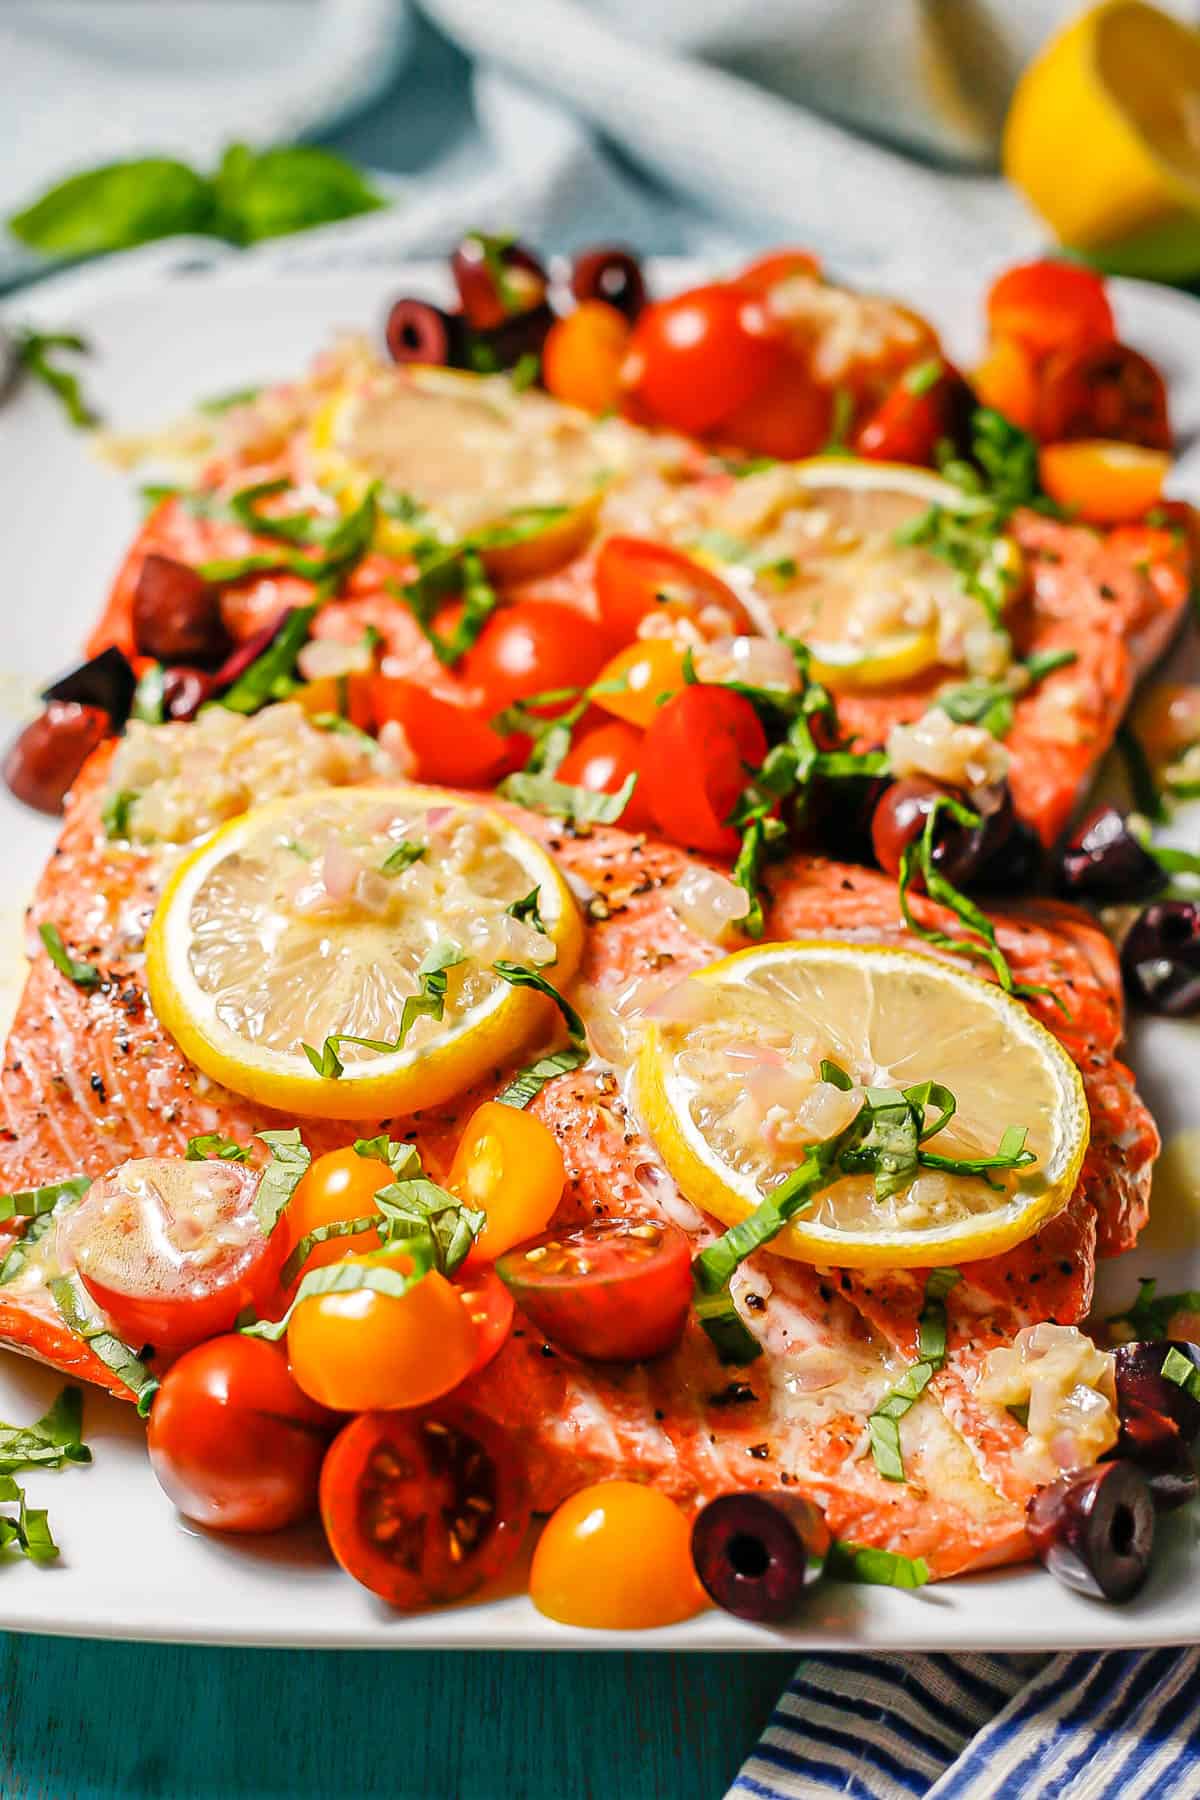 Large salmon filets served on a white platter topped with lemon slices, assorted colored tomatoes, olives, basil and a shallot dressing.